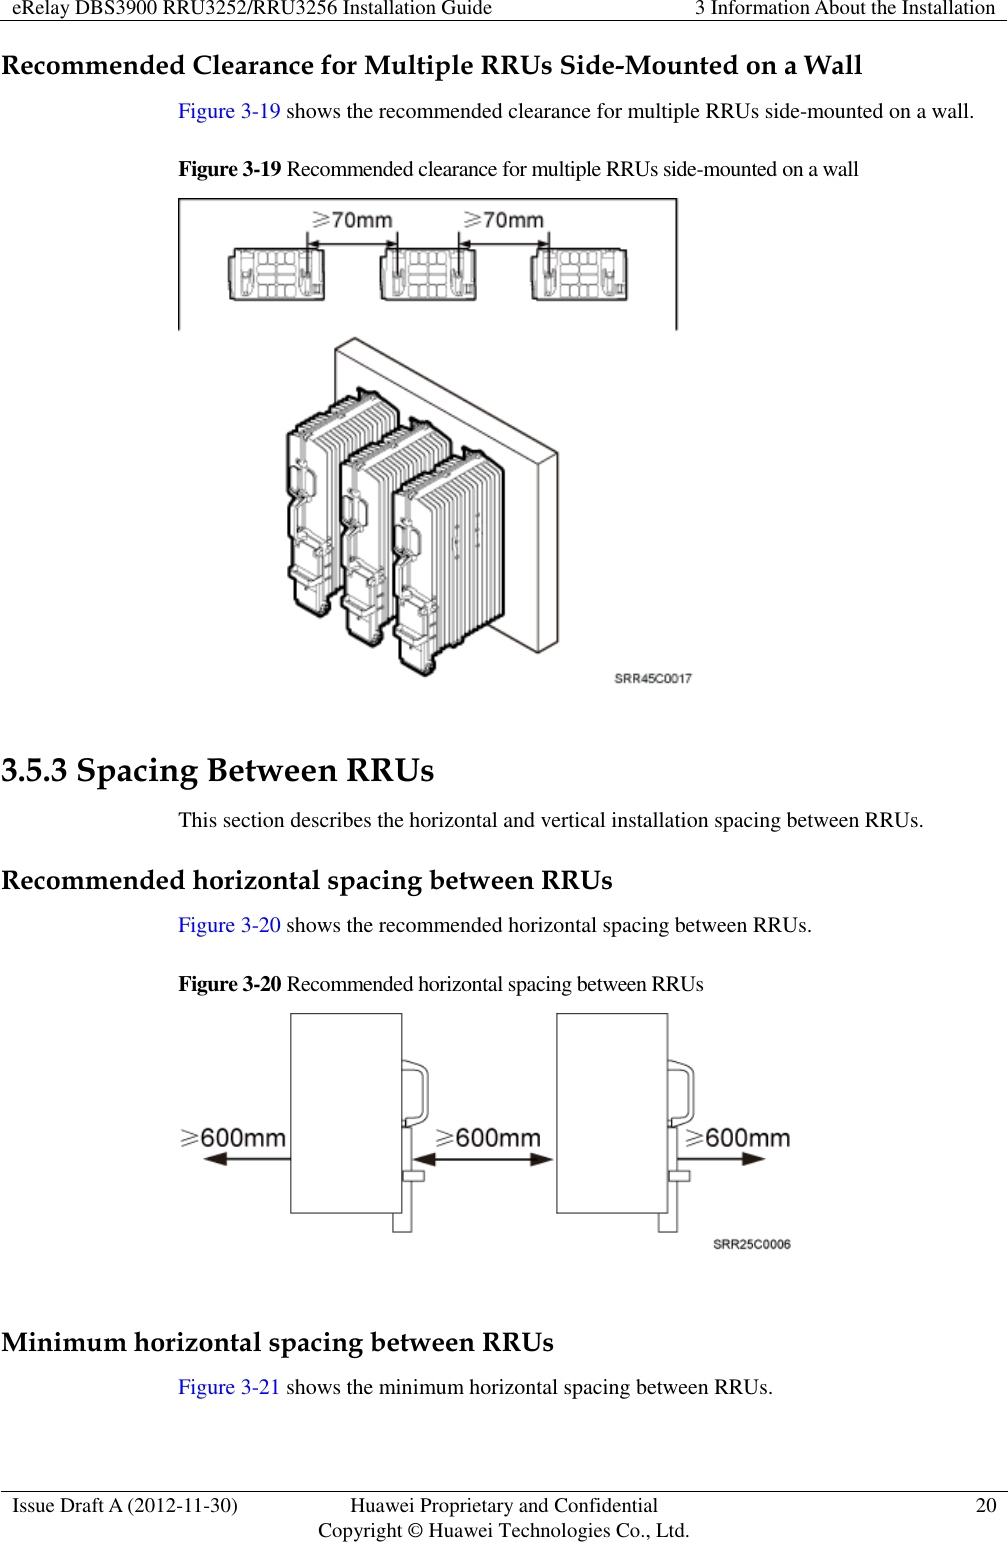 eRelay DBS3900 RRU3252/RRU3256 Installation Guide 3 Information About the Installation  Issue Draft A (2012-11-30) Huawei Proprietary and Confidential                                     Copyright © Huawei Technologies Co., Ltd. 20  Recommended Clearance for Multiple RRUs Side-Mounted on a Wall Figure 3-19 shows the recommended clearance for multiple RRUs side-mounted on a wall.   Figure 3-19 Recommended clearance for multiple RRUs side-mounted on a wall   3.5.3 Spacing Between RRUs This section describes the horizontal and vertical installation spacing between RRUs. Recommended horizontal spacing between RRUs Figure 3-20 shows the recommended horizontal spacing between RRUs. Figure 3-20 Recommended horizontal spacing between RRUs   Minimum horizontal spacing between RRUs Figure 3-21 shows the minimum horizontal spacing between RRUs. 